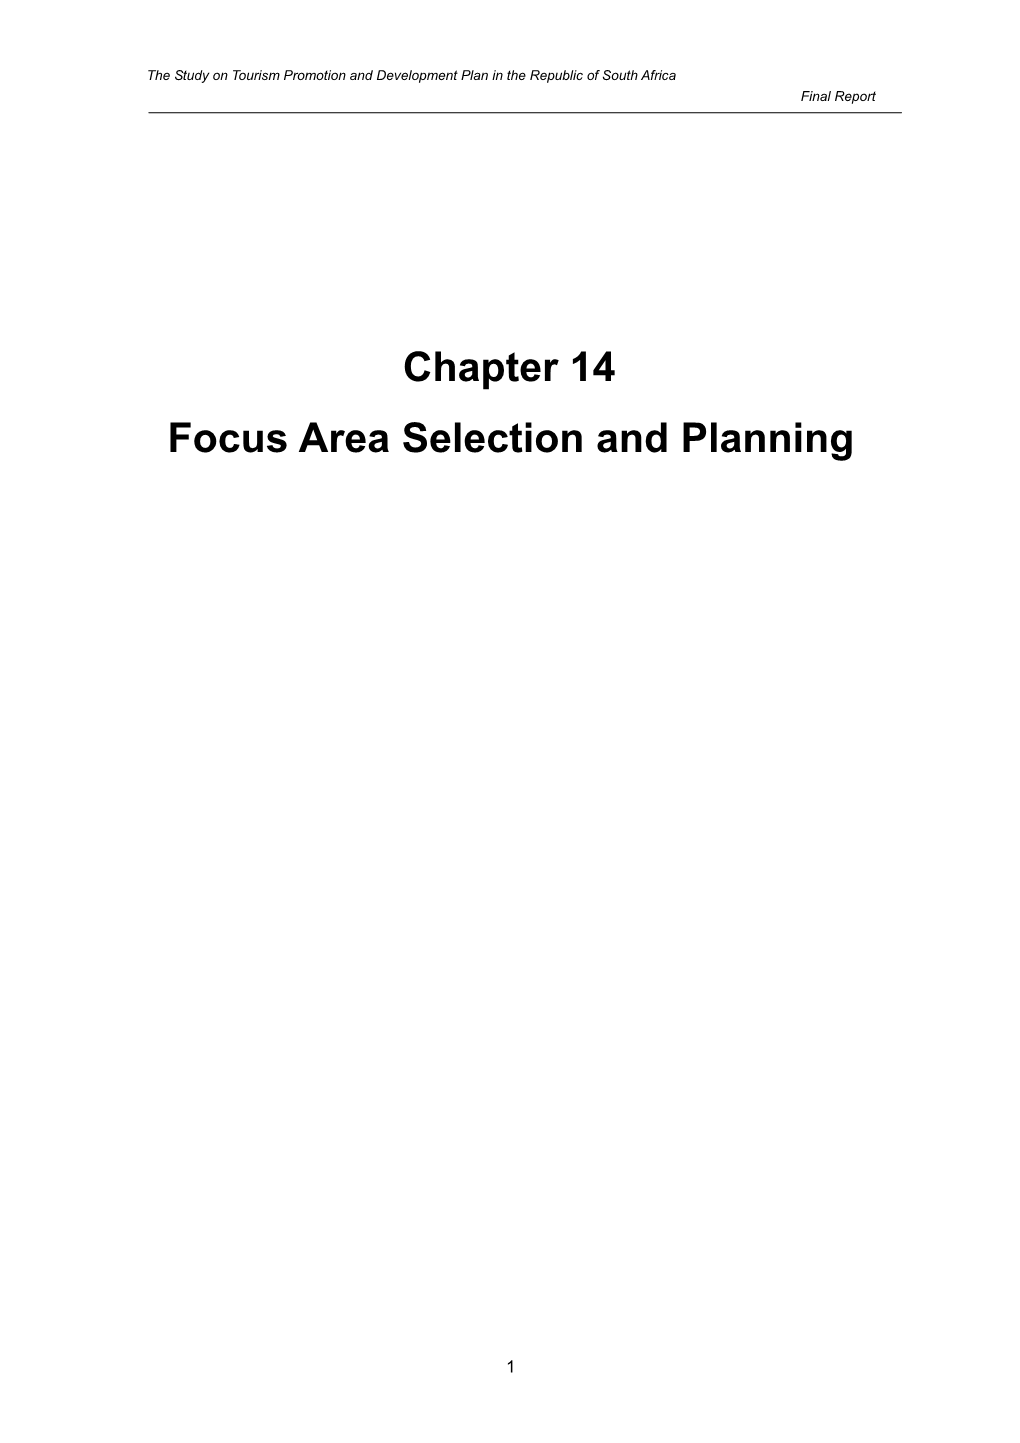 Focus Area Selection and Planning